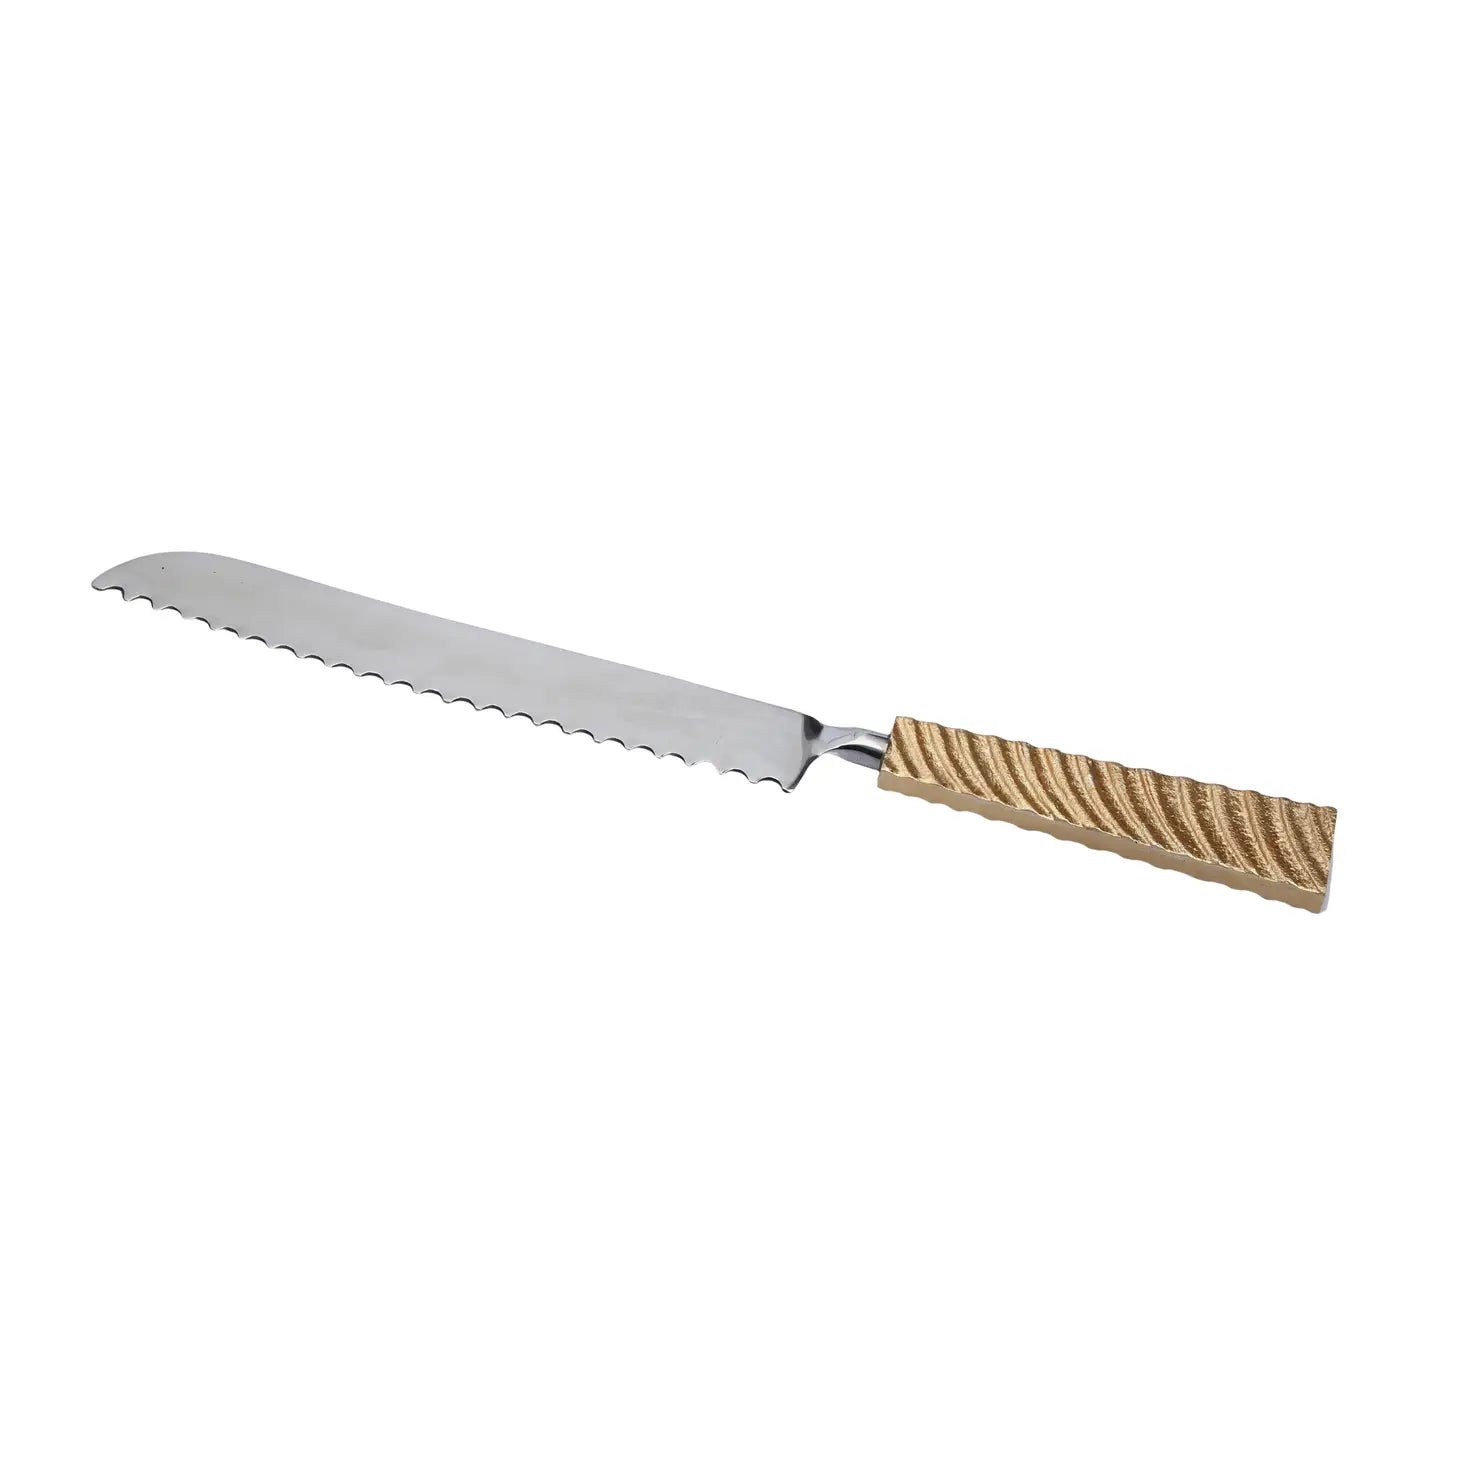 Knife with gold wavy handle